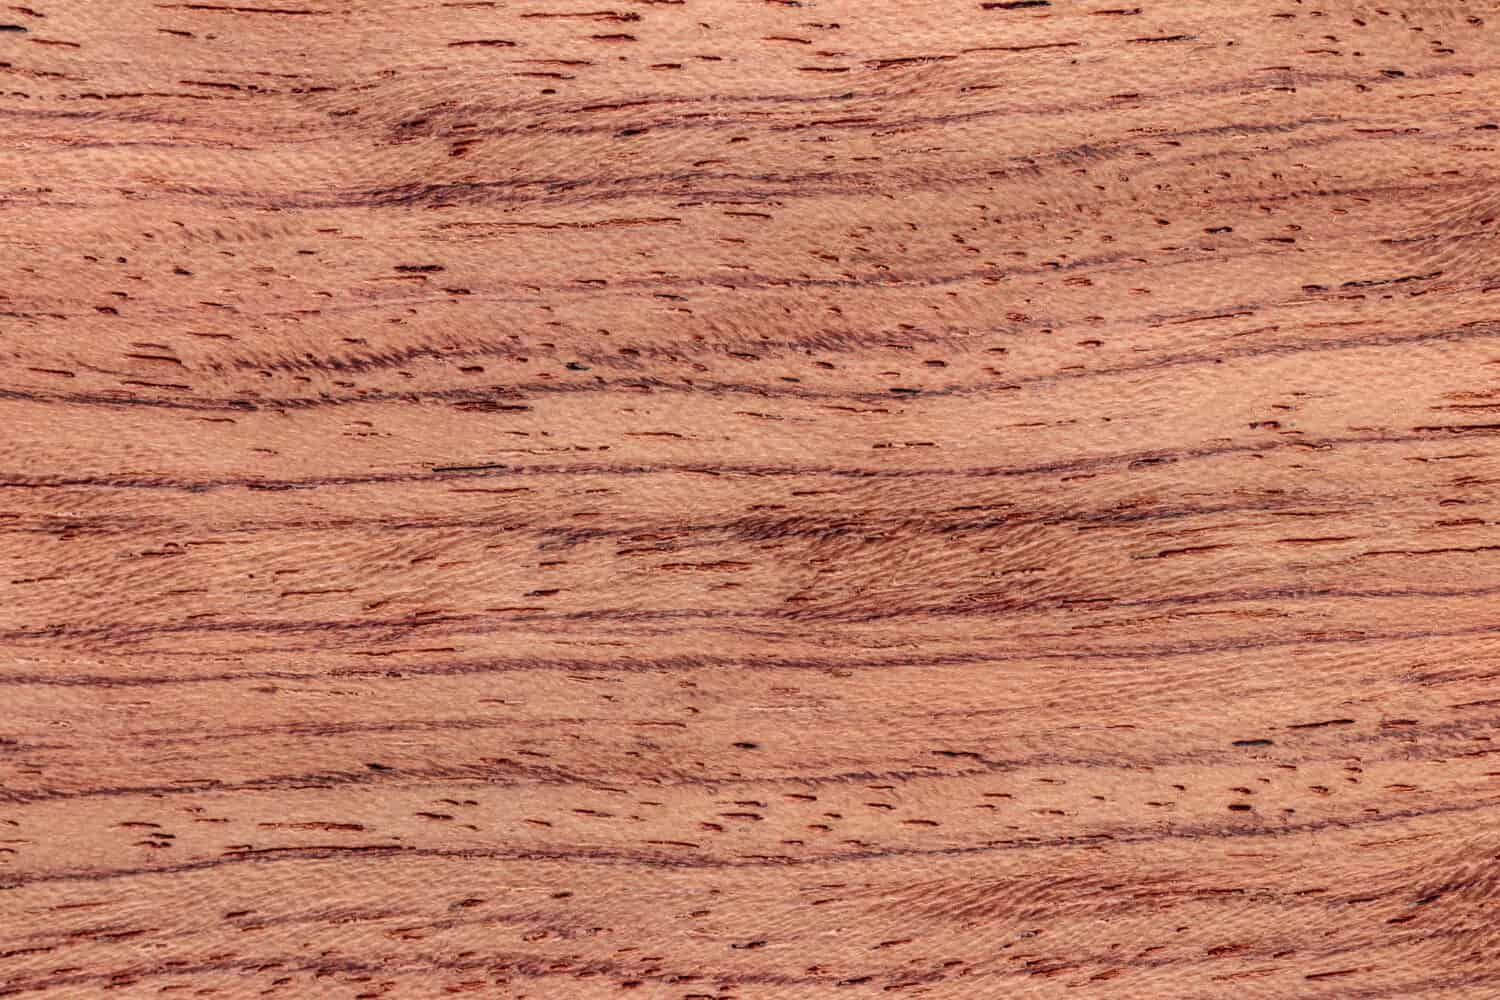 Close up image of natural (unpolished) African Rosewood (Guibourtia Demeusei or more commonly know as Bubinga wood) surface texture